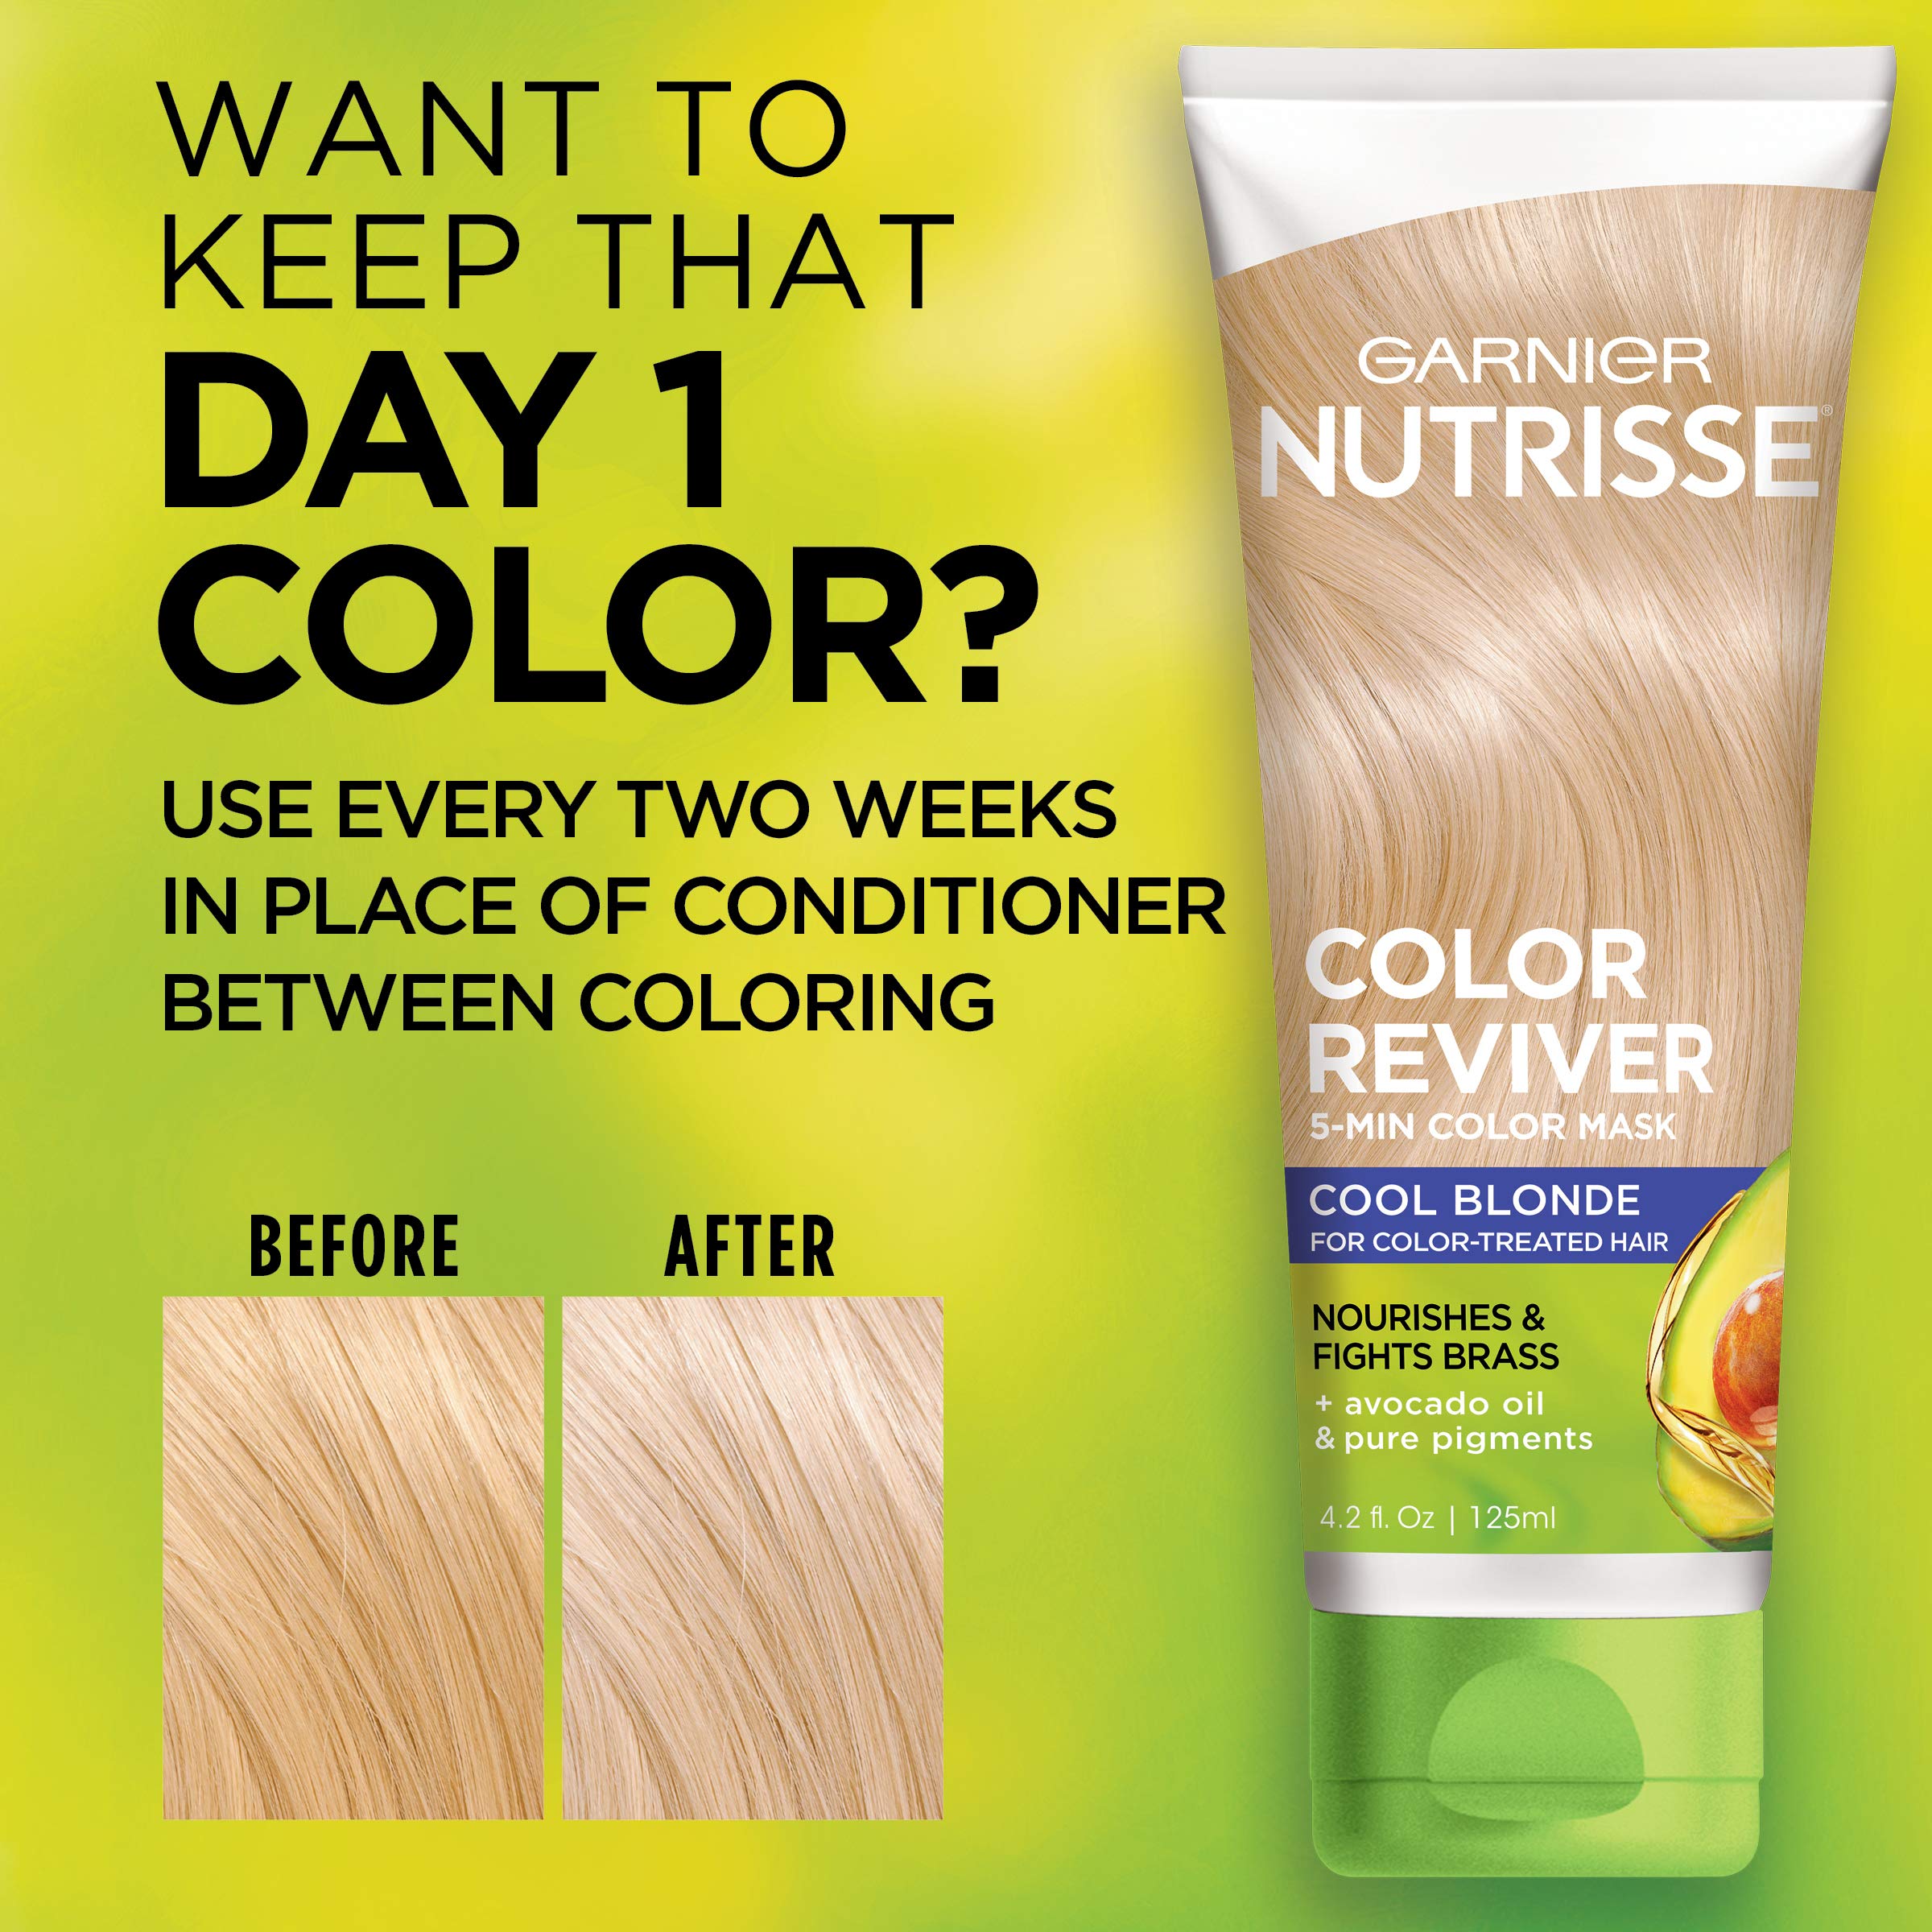 Garnier Nutrisse 5 Minute Nourishing Color Hair Mask with Triple Oils Delivers Day 1 Color Results, for Color Treated Hair, Cool Blonde, 4.2 fl. oz.